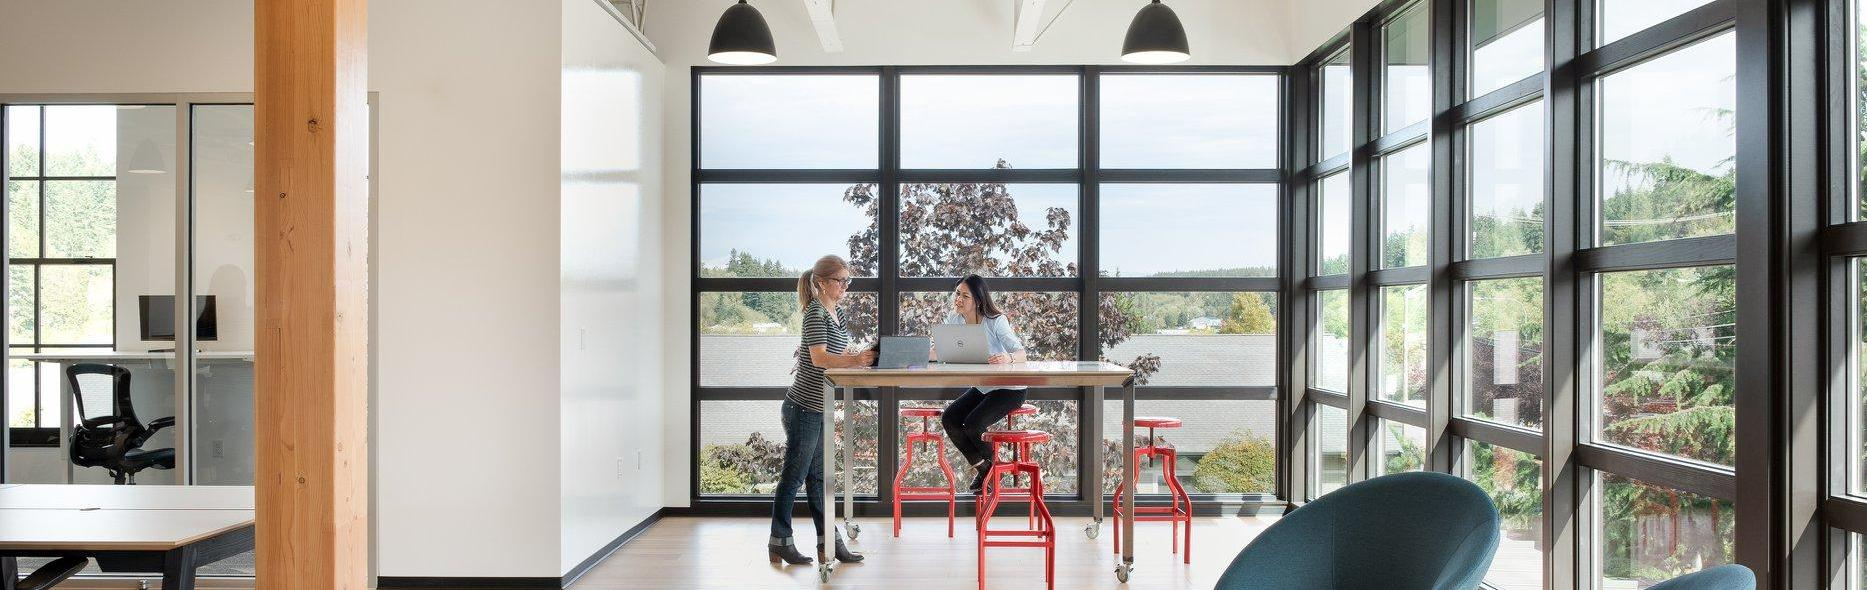 two women with laptops at high top table in modern office building space